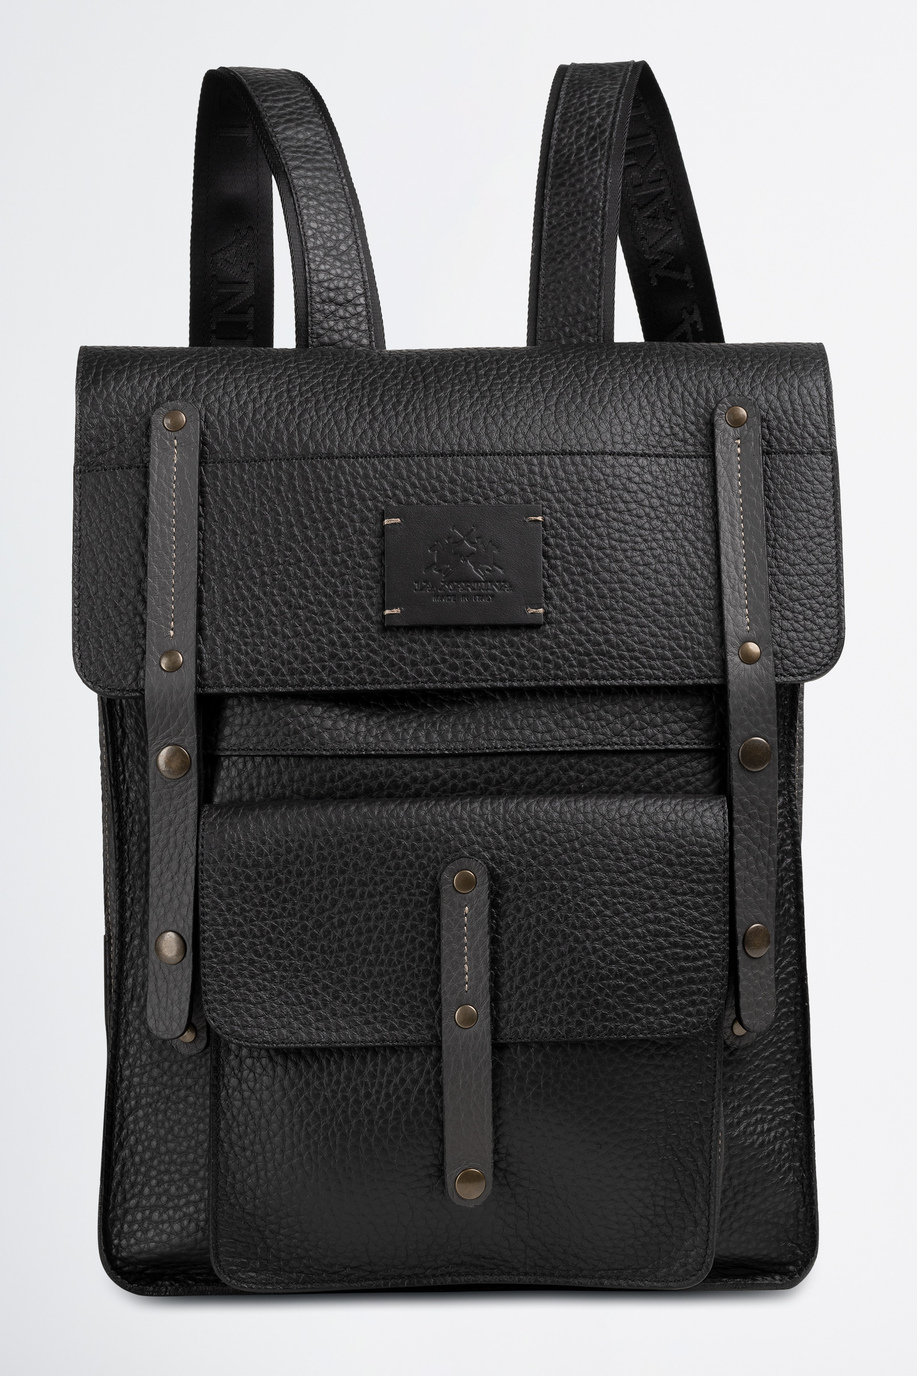 Backpack in calf leather leather - Man leather goods | La Martina - Official Online Shop